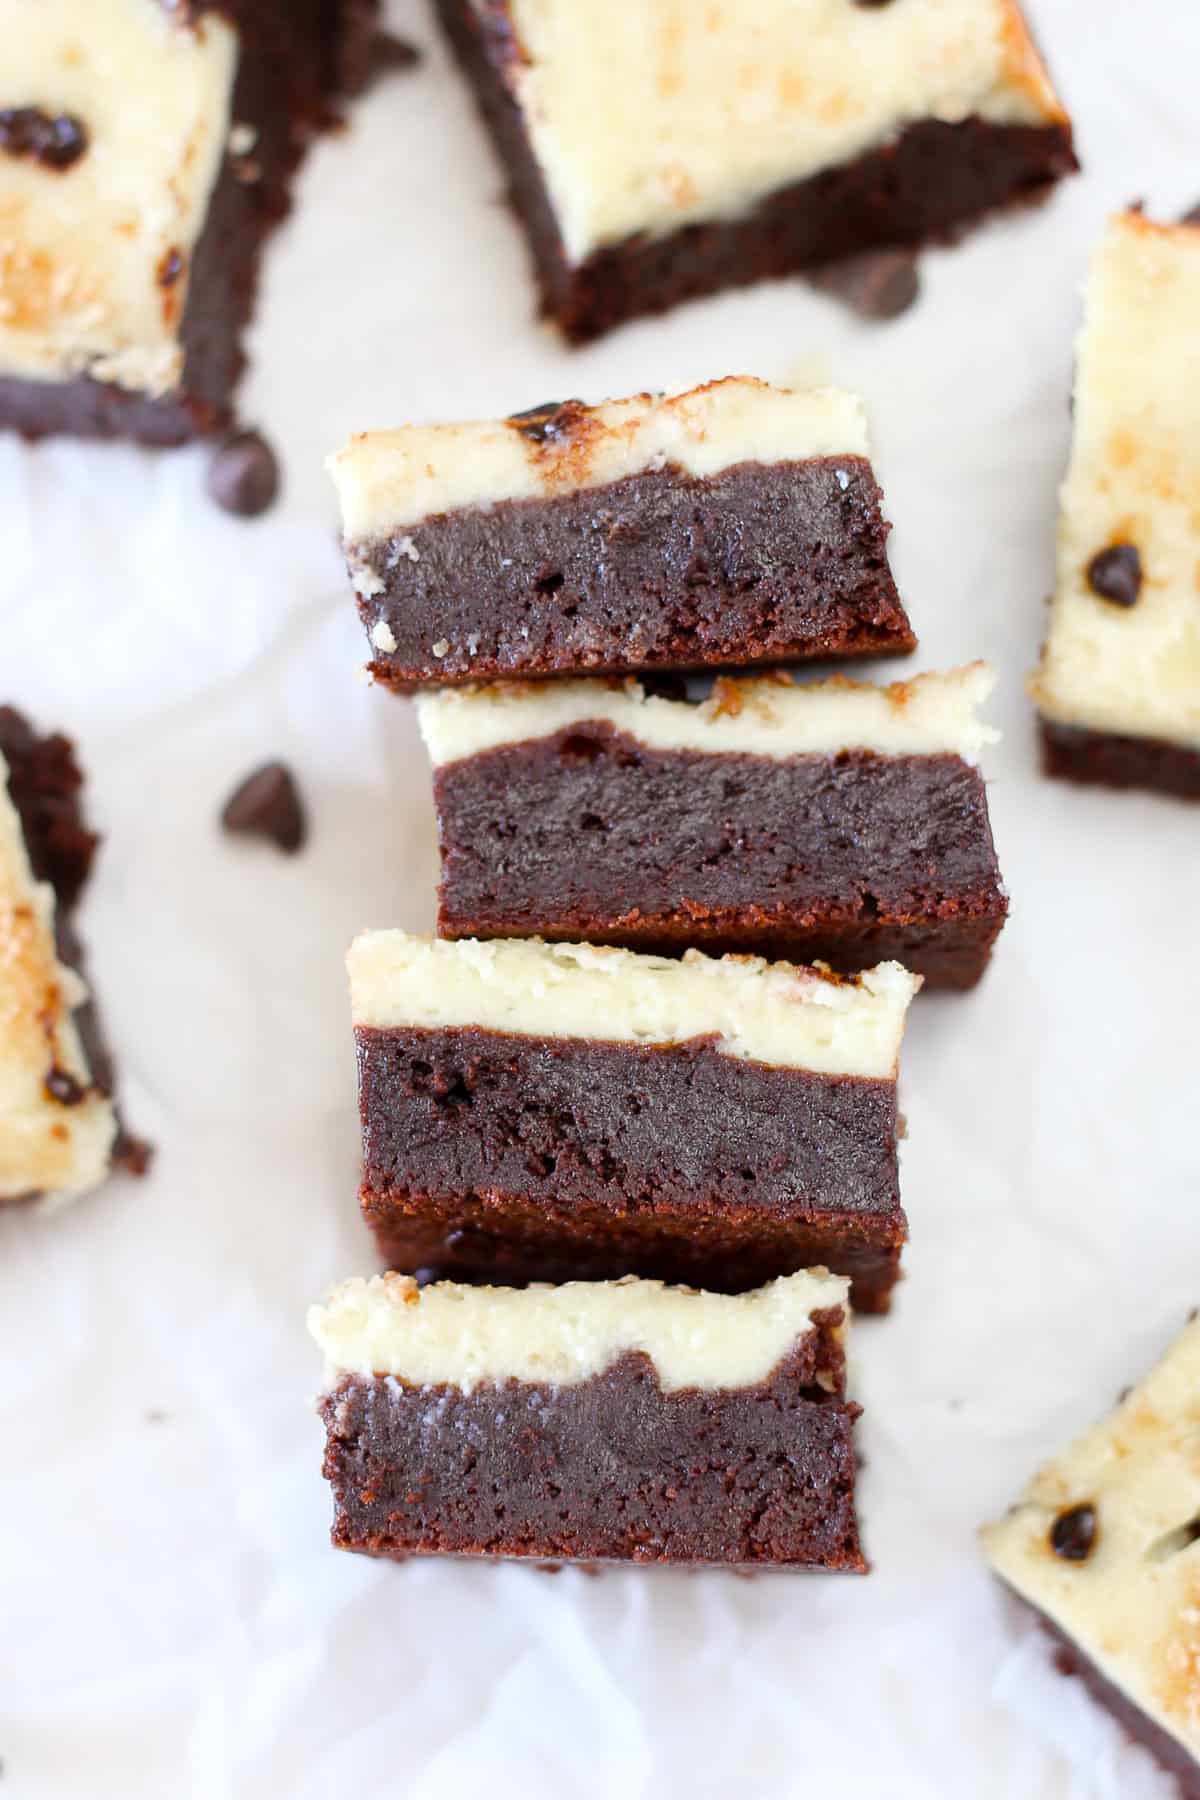 Four chocolate chip cheesecake brownies on their side sowing the distinct brownie and cheesecake layers.